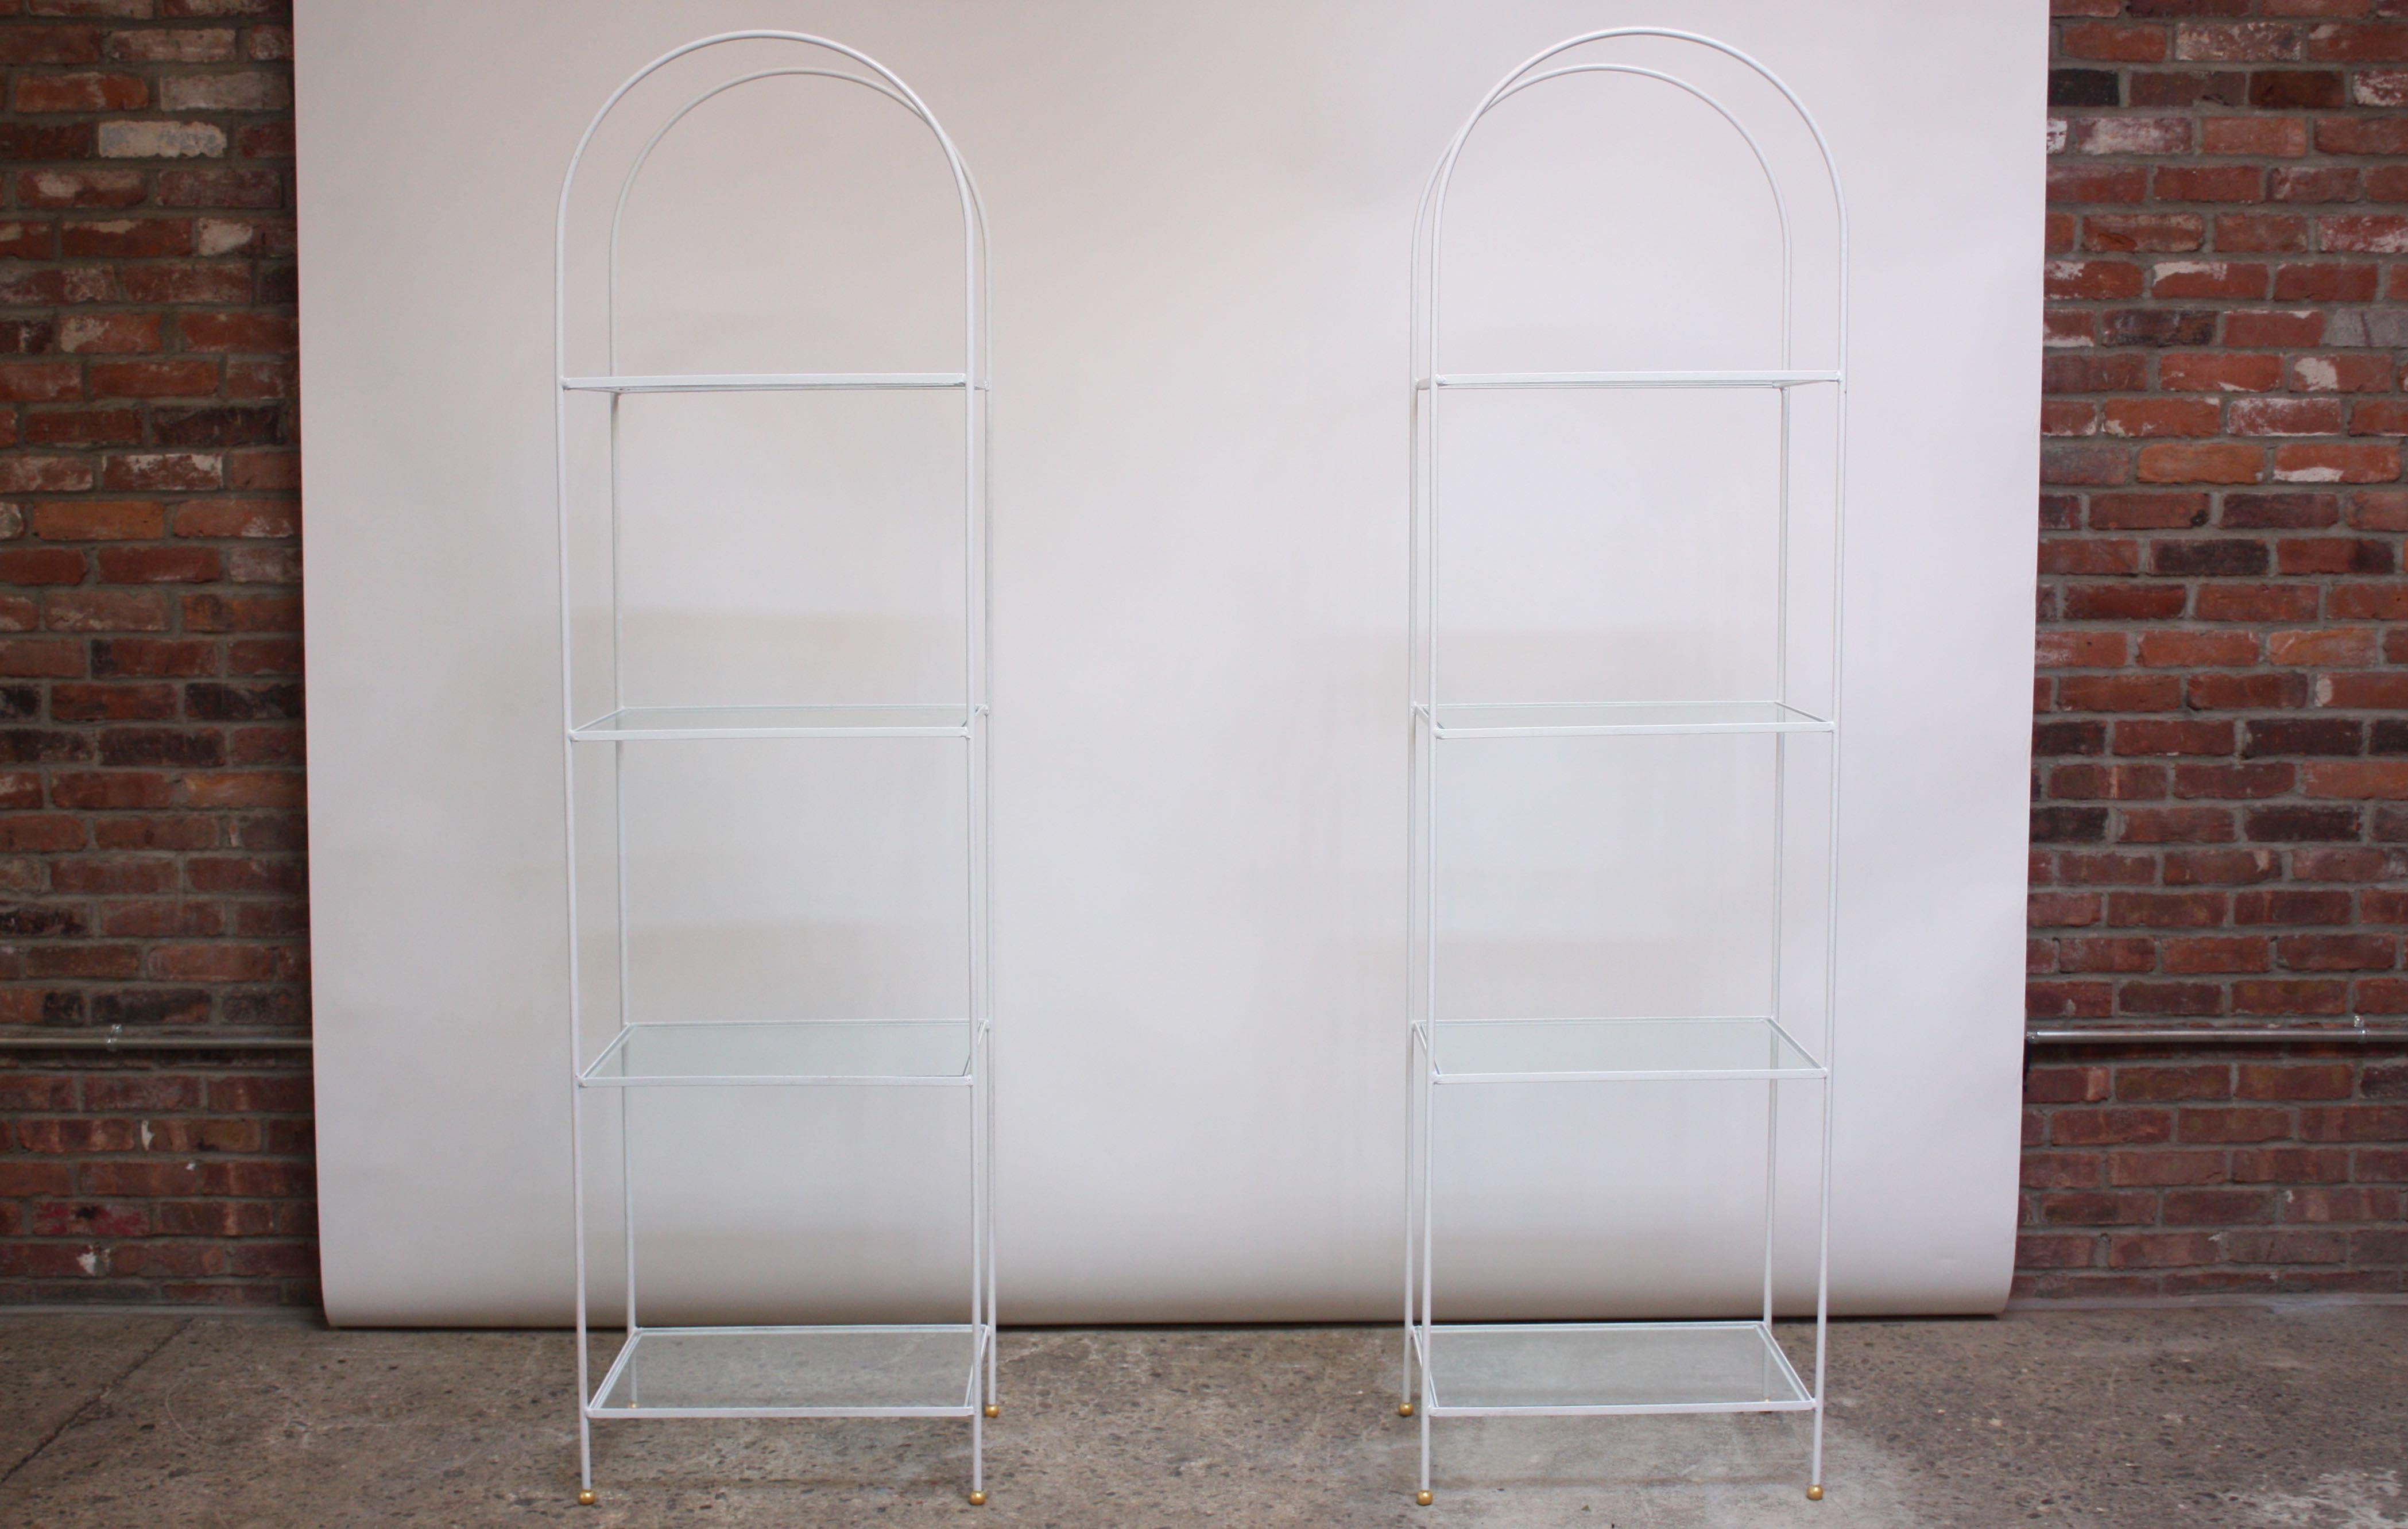 Pair of 1960s arched shelving units / book shelves / etageres composed of white wrought iron frames with inset glass shelves (four / unit). 'Ball' feet have been freshly painted gold; white paint is original and is in good, vintage condition with